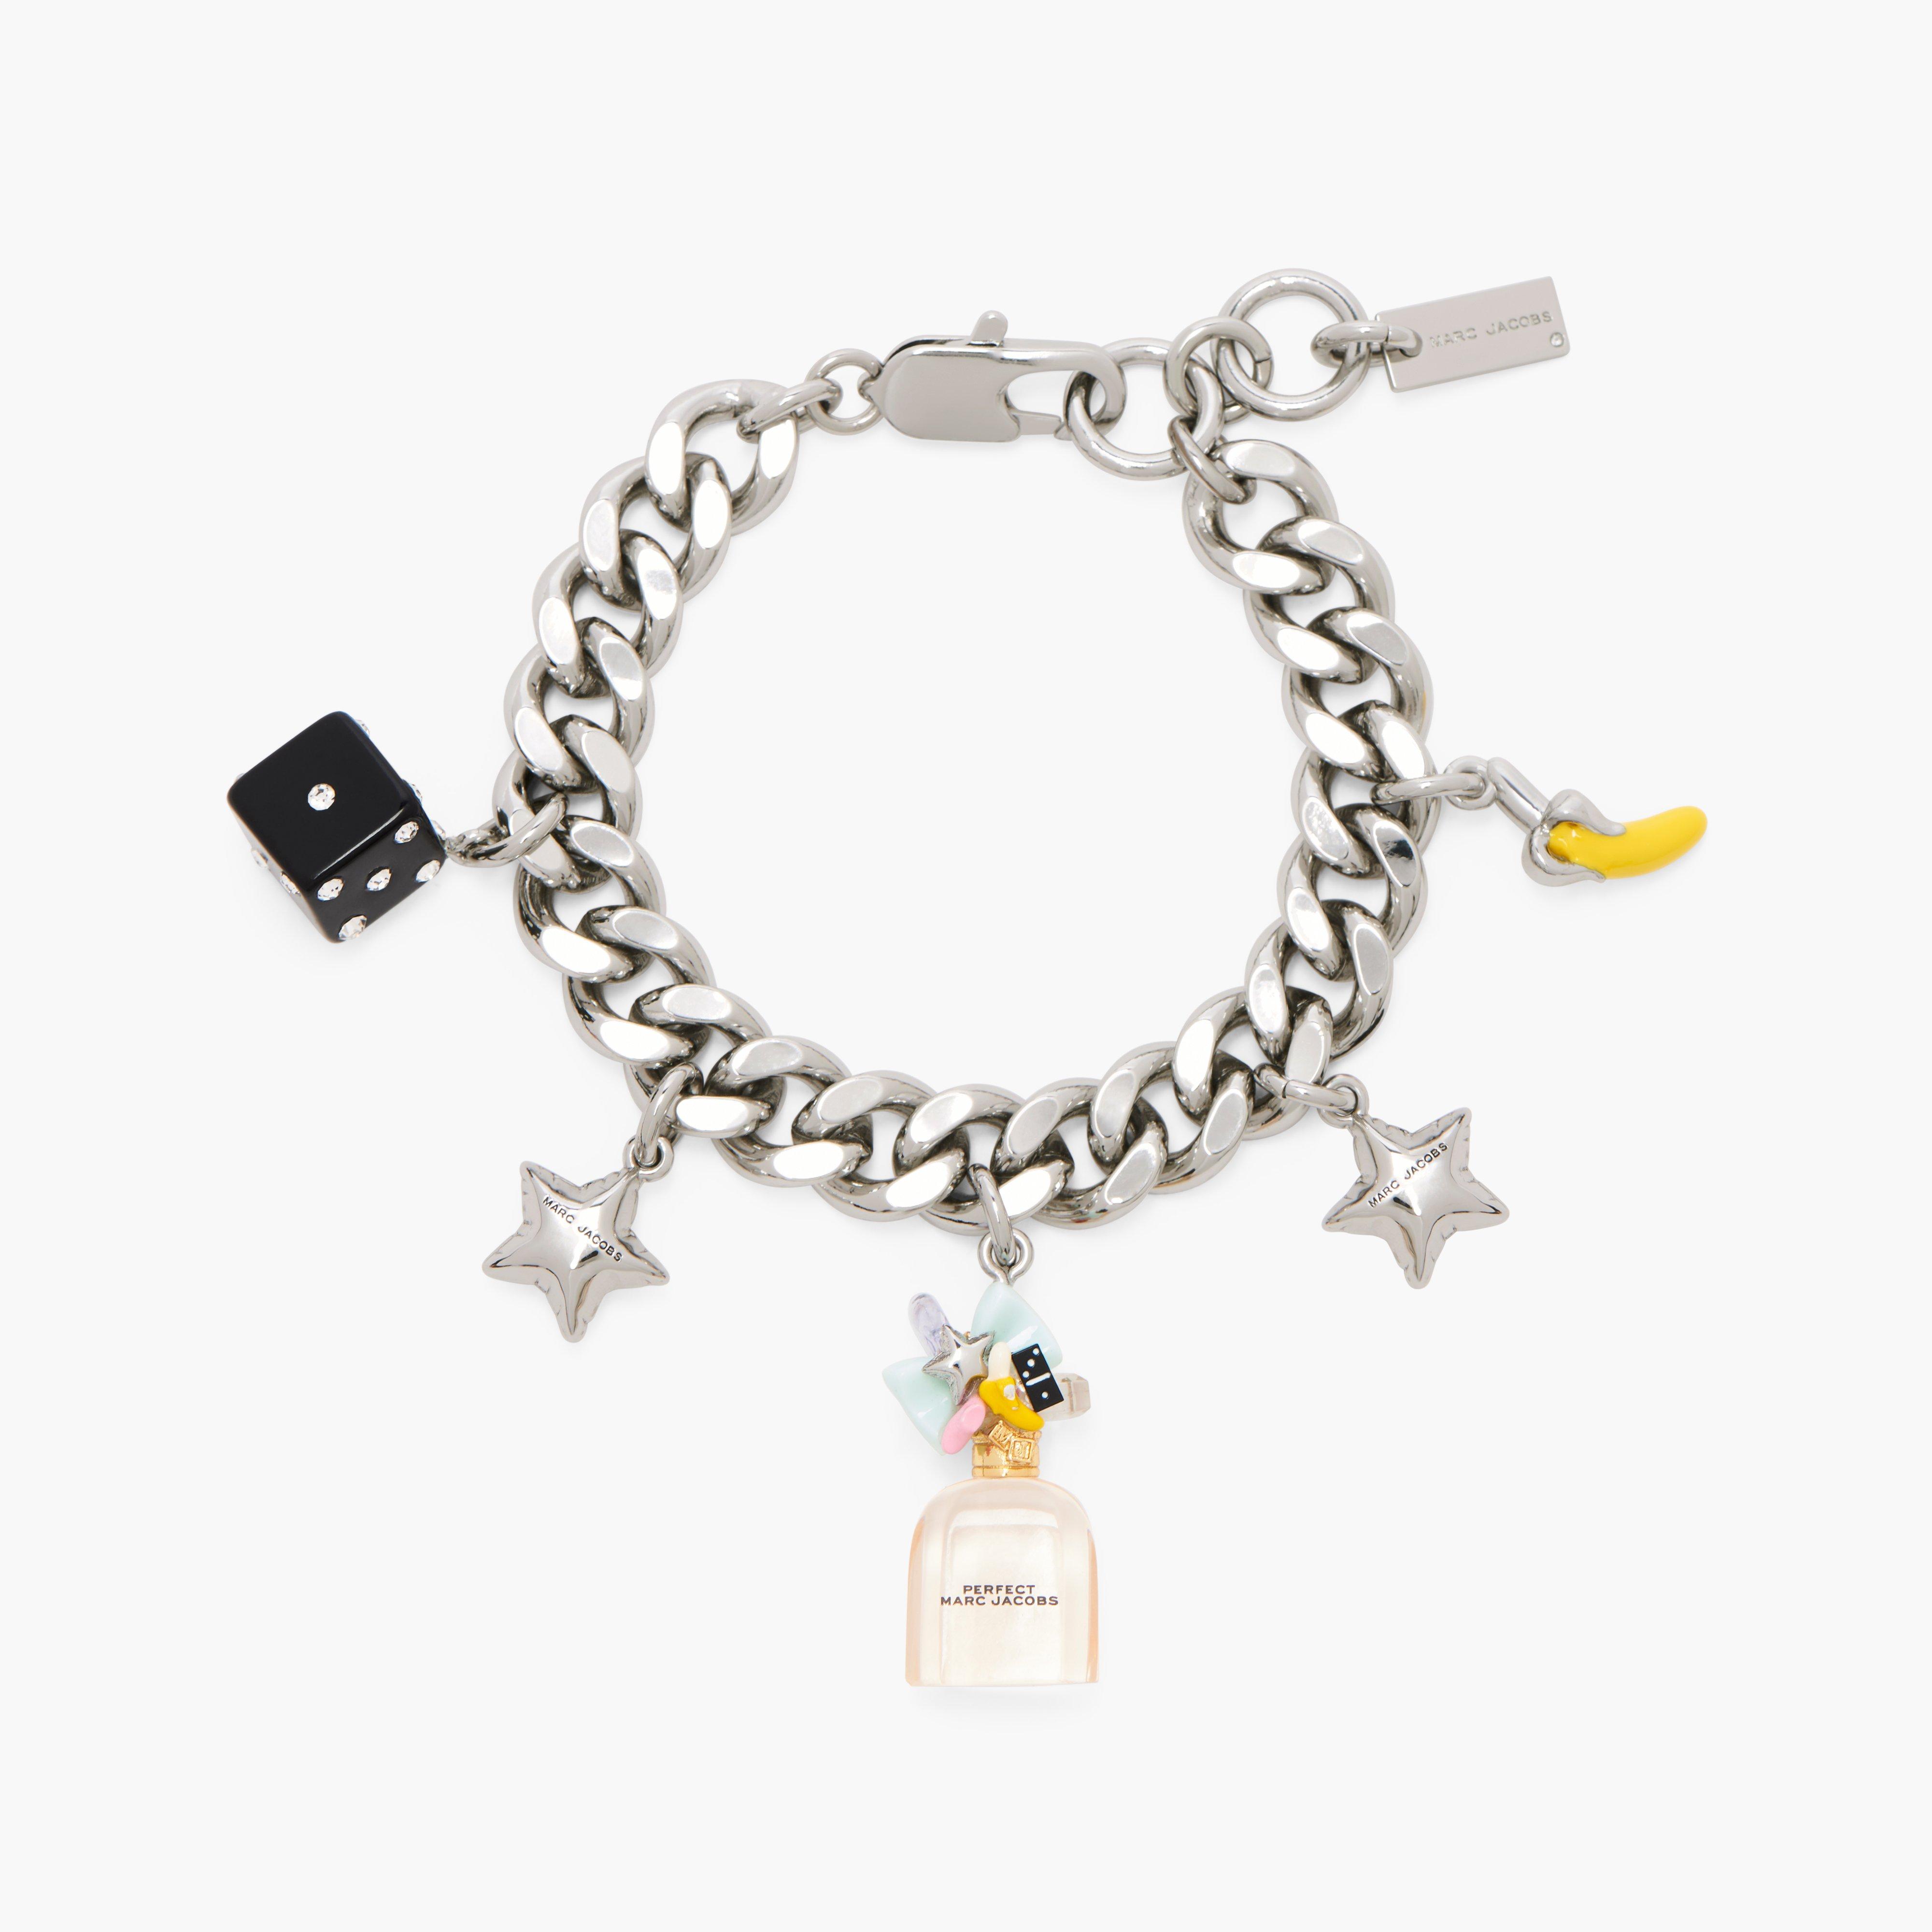 Marc by Marc jacobs Perfect Charm Bracelet,SILVER/PINK MULTI